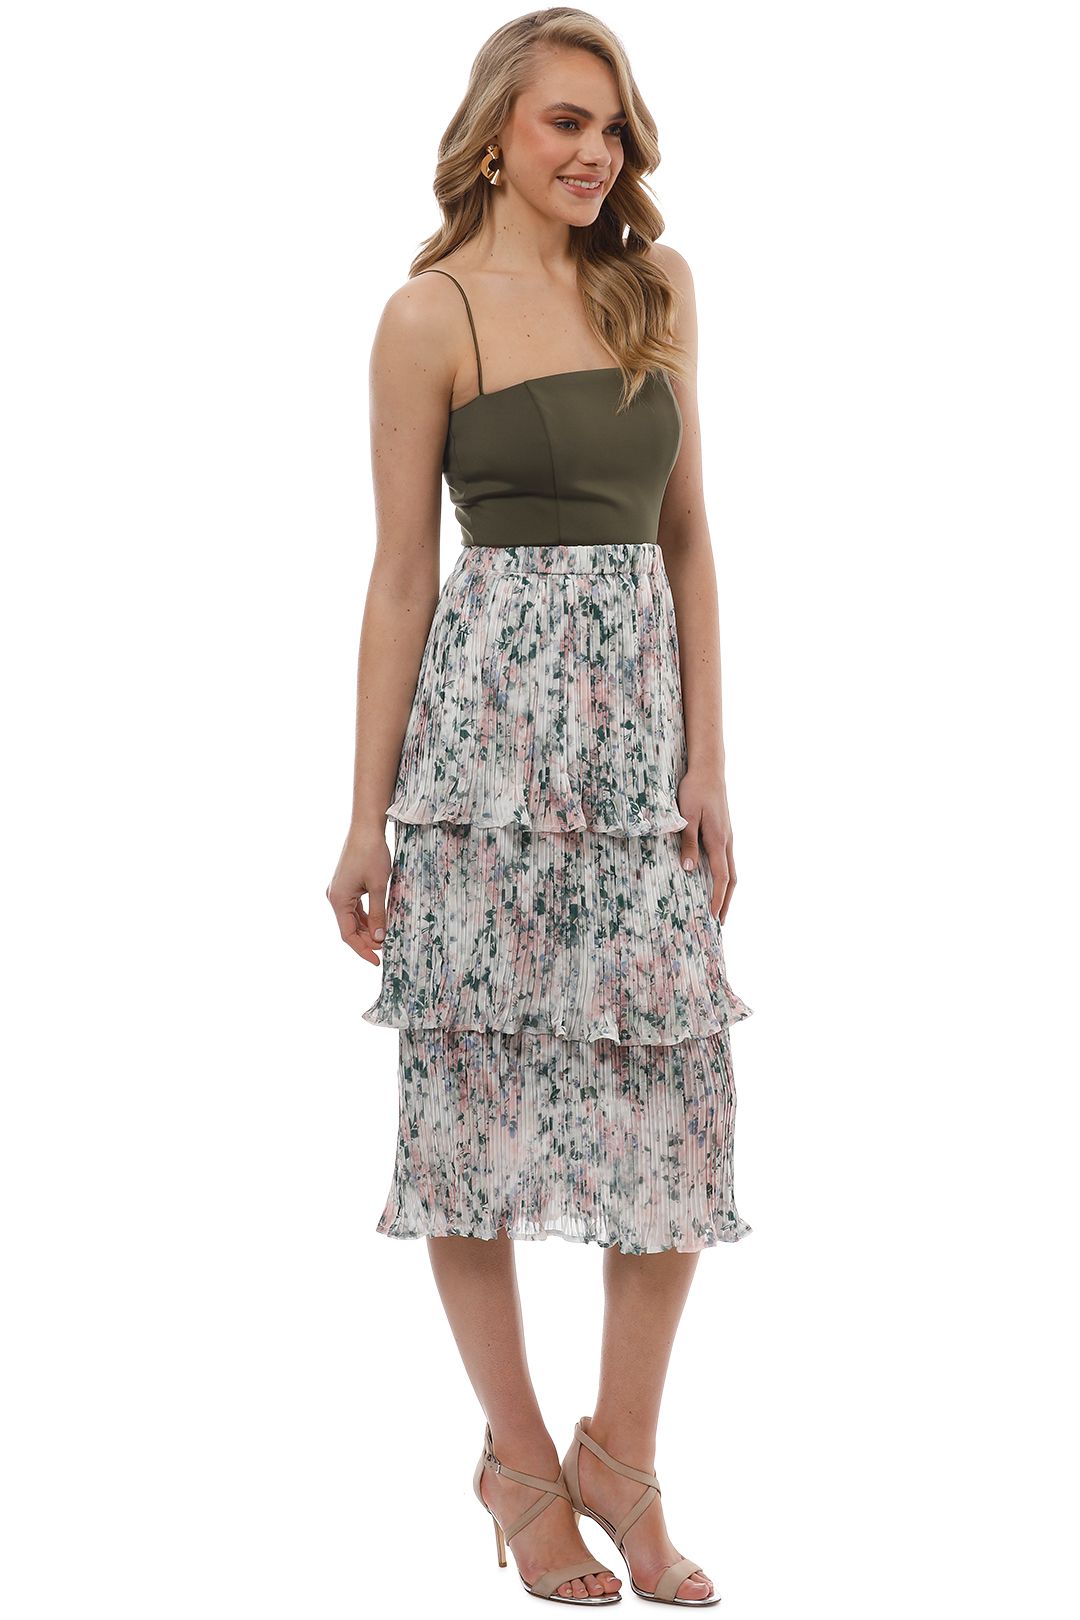 We Are Kindred - Anais Pleatd Tier Skirt - Florist Print - Side